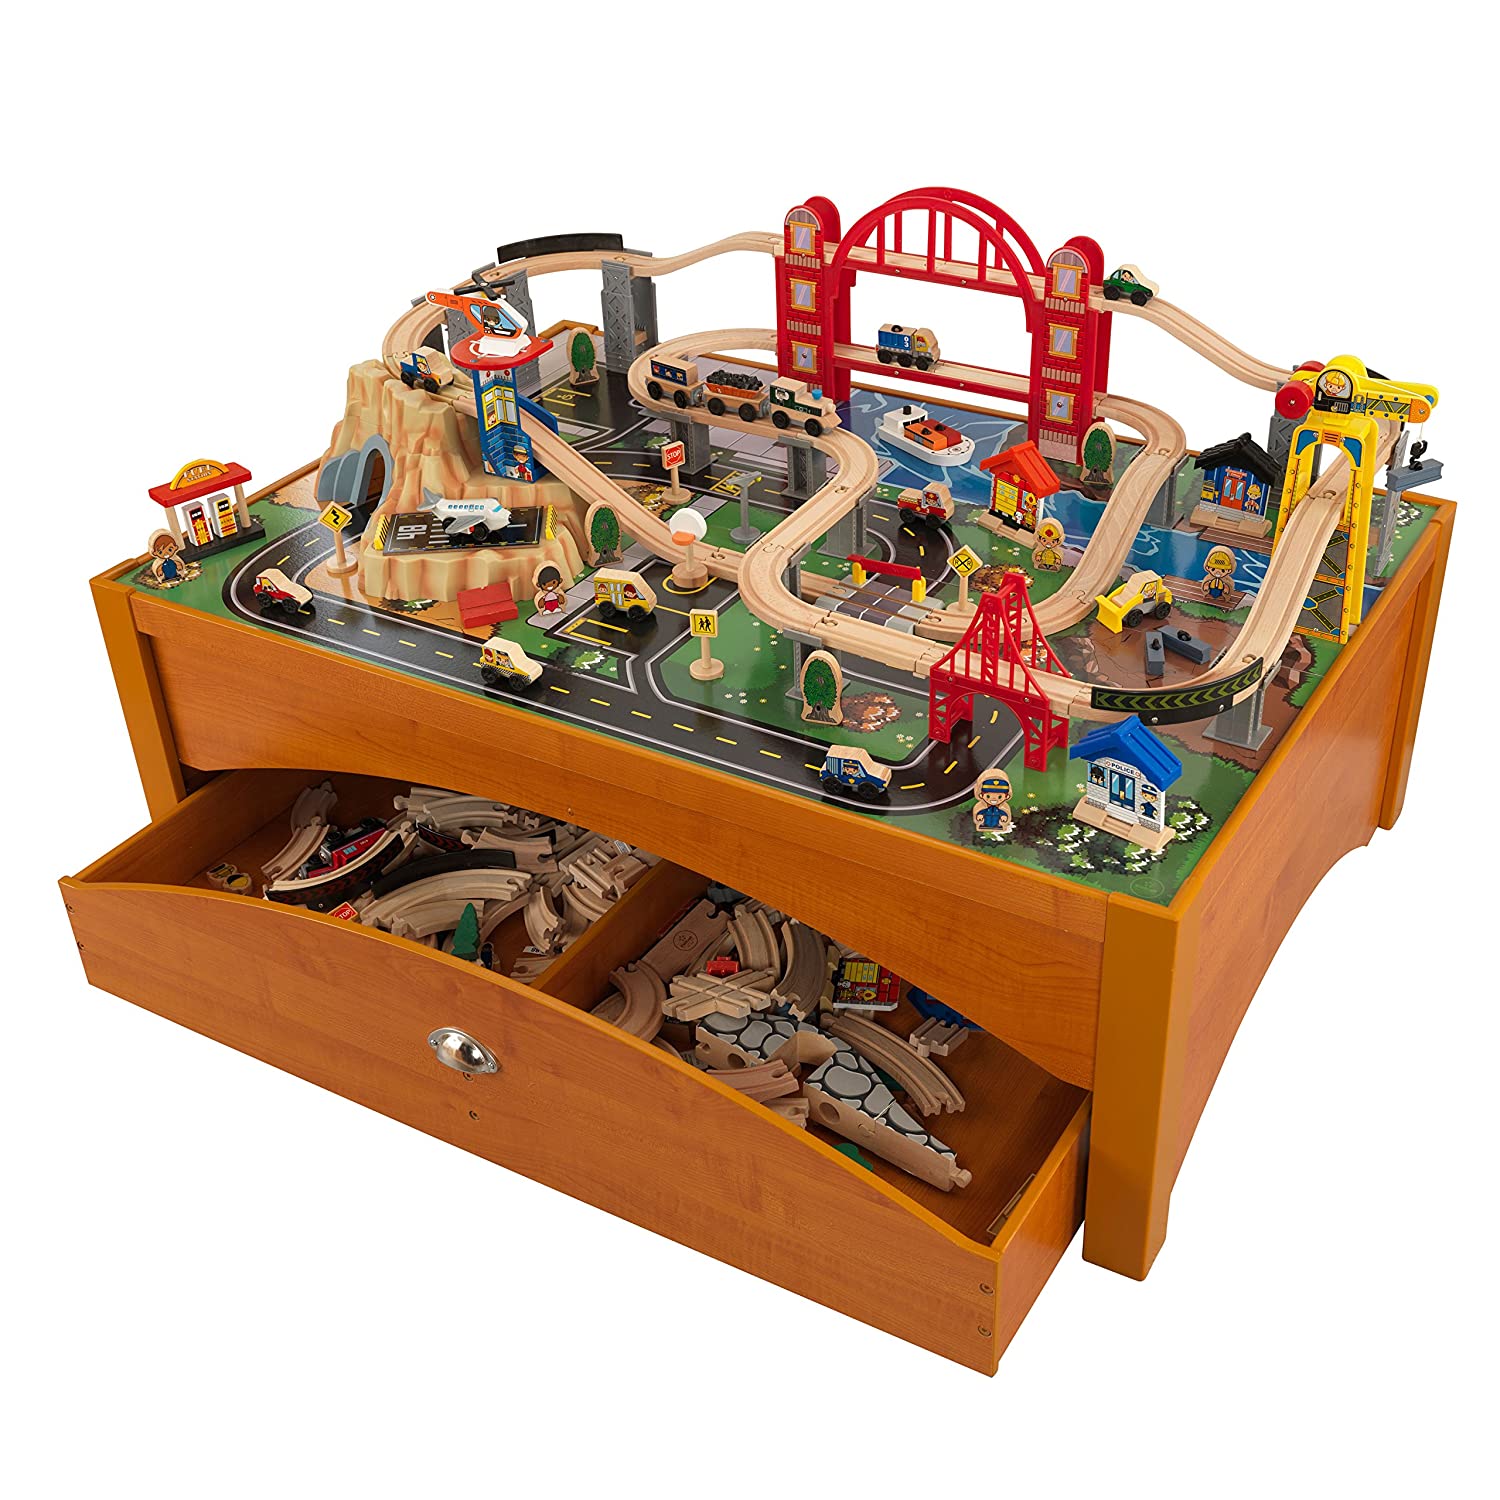 10 Best Train Tables For Toddlers & Kids Reviews in 2023 1